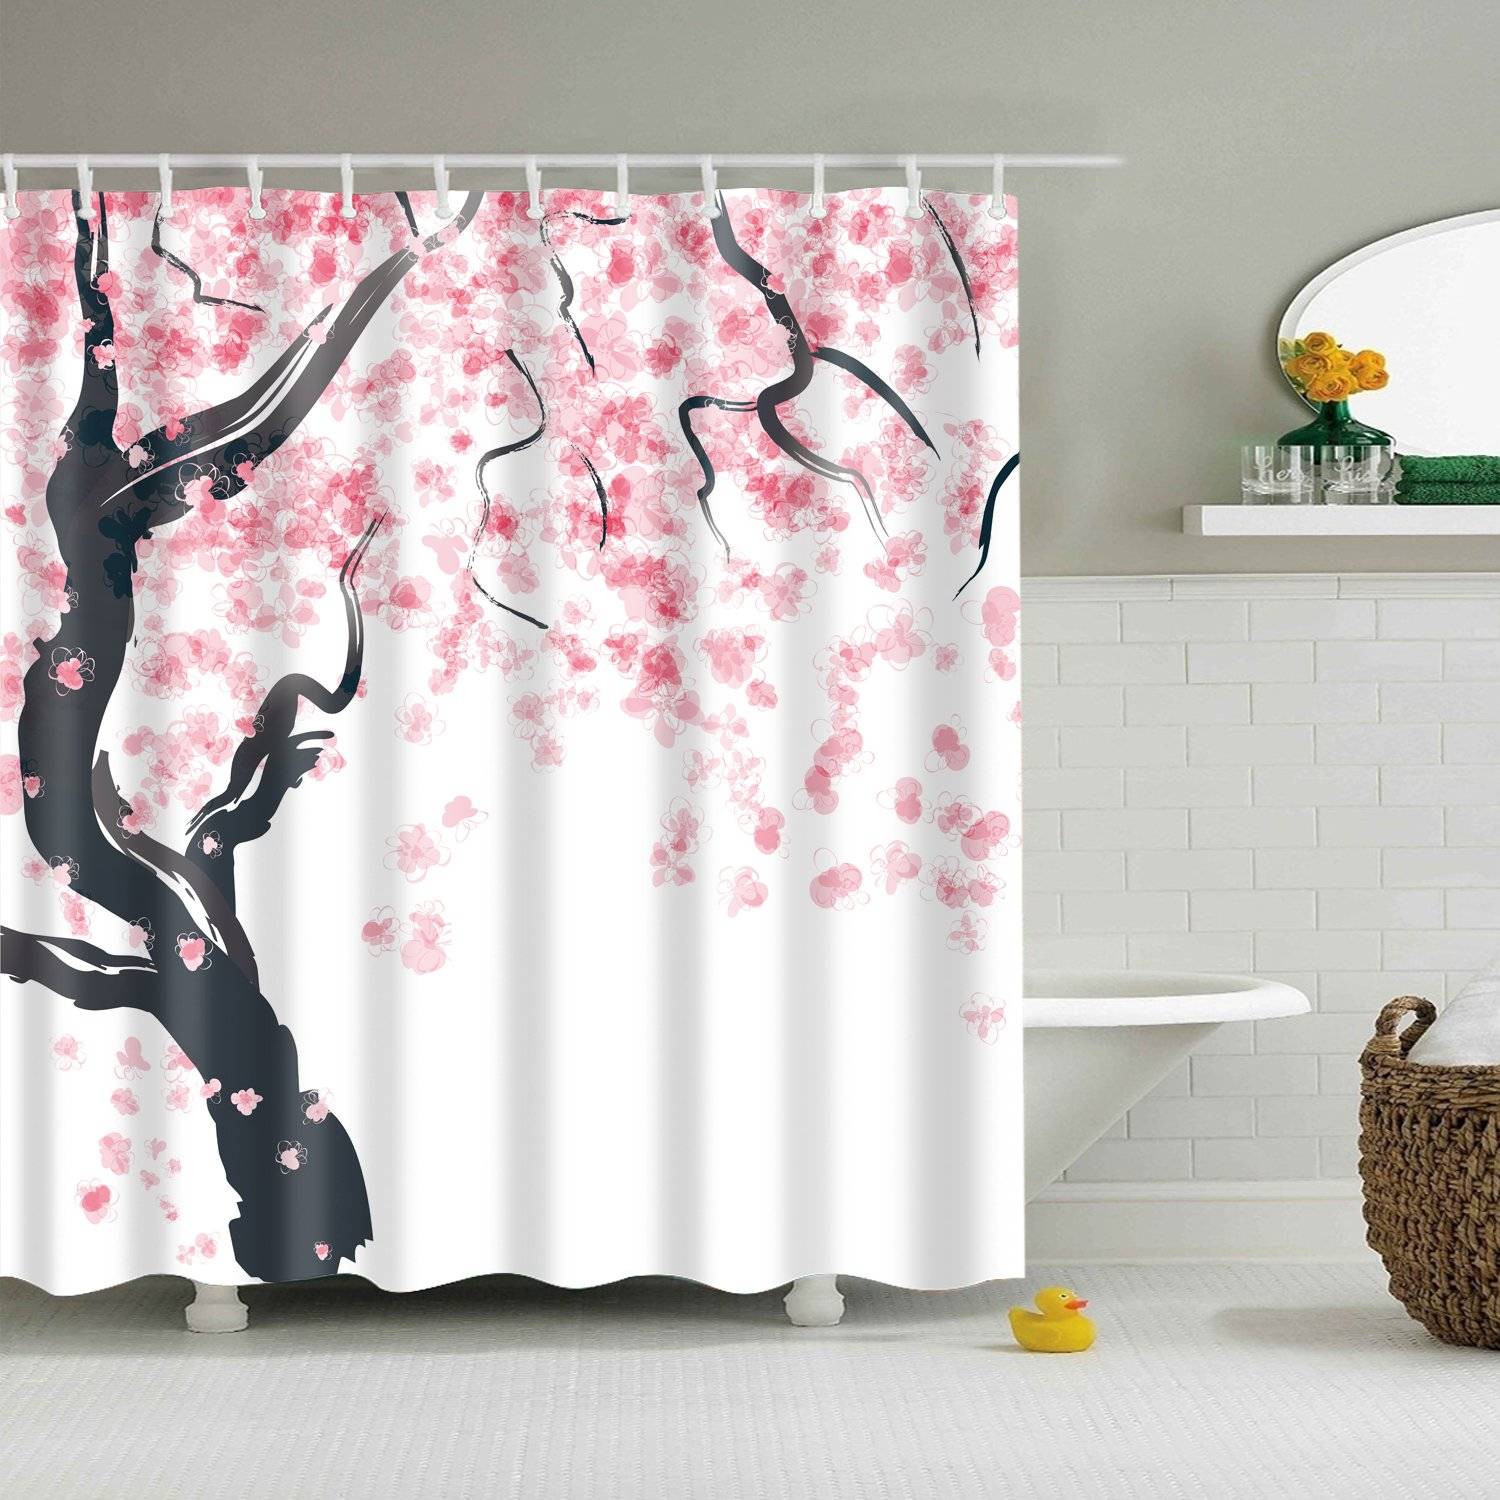 Beautiful Natural Tree Pink Cherry Blossom Shower Curtain